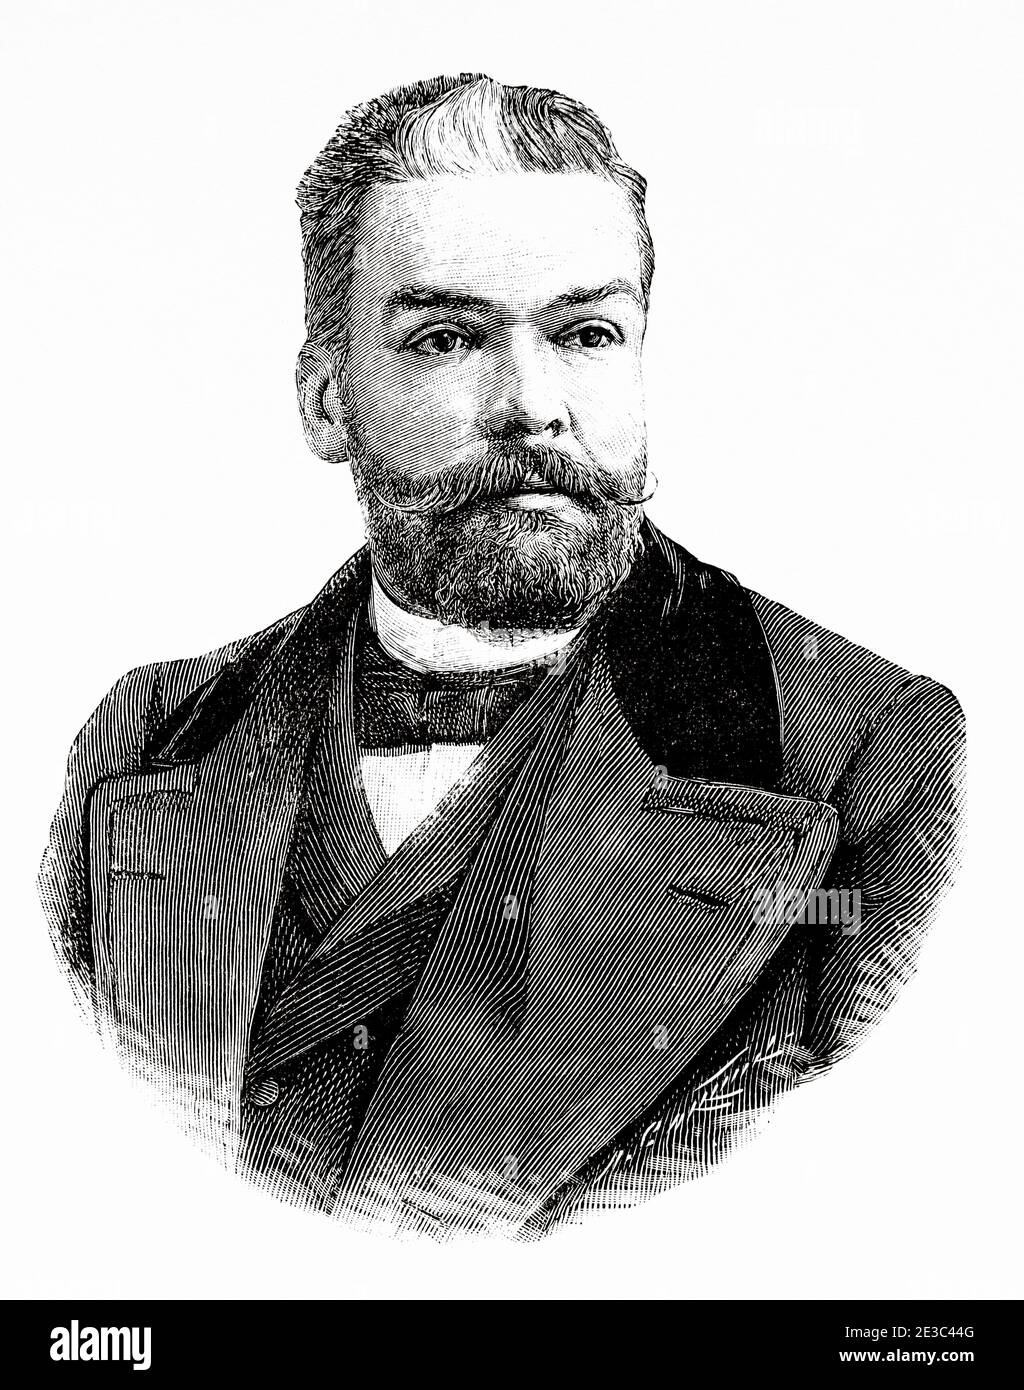 Portrait of Doctor Vicente Llorente y Matos (Las Palmas 1857 - Madrid 1916) used a treatment against diphtheria in Madrid at the end of the 19th century, Spain. Old XIX century engraved illustration from La Ilustracion Española y Americana 1894 Stock Photo